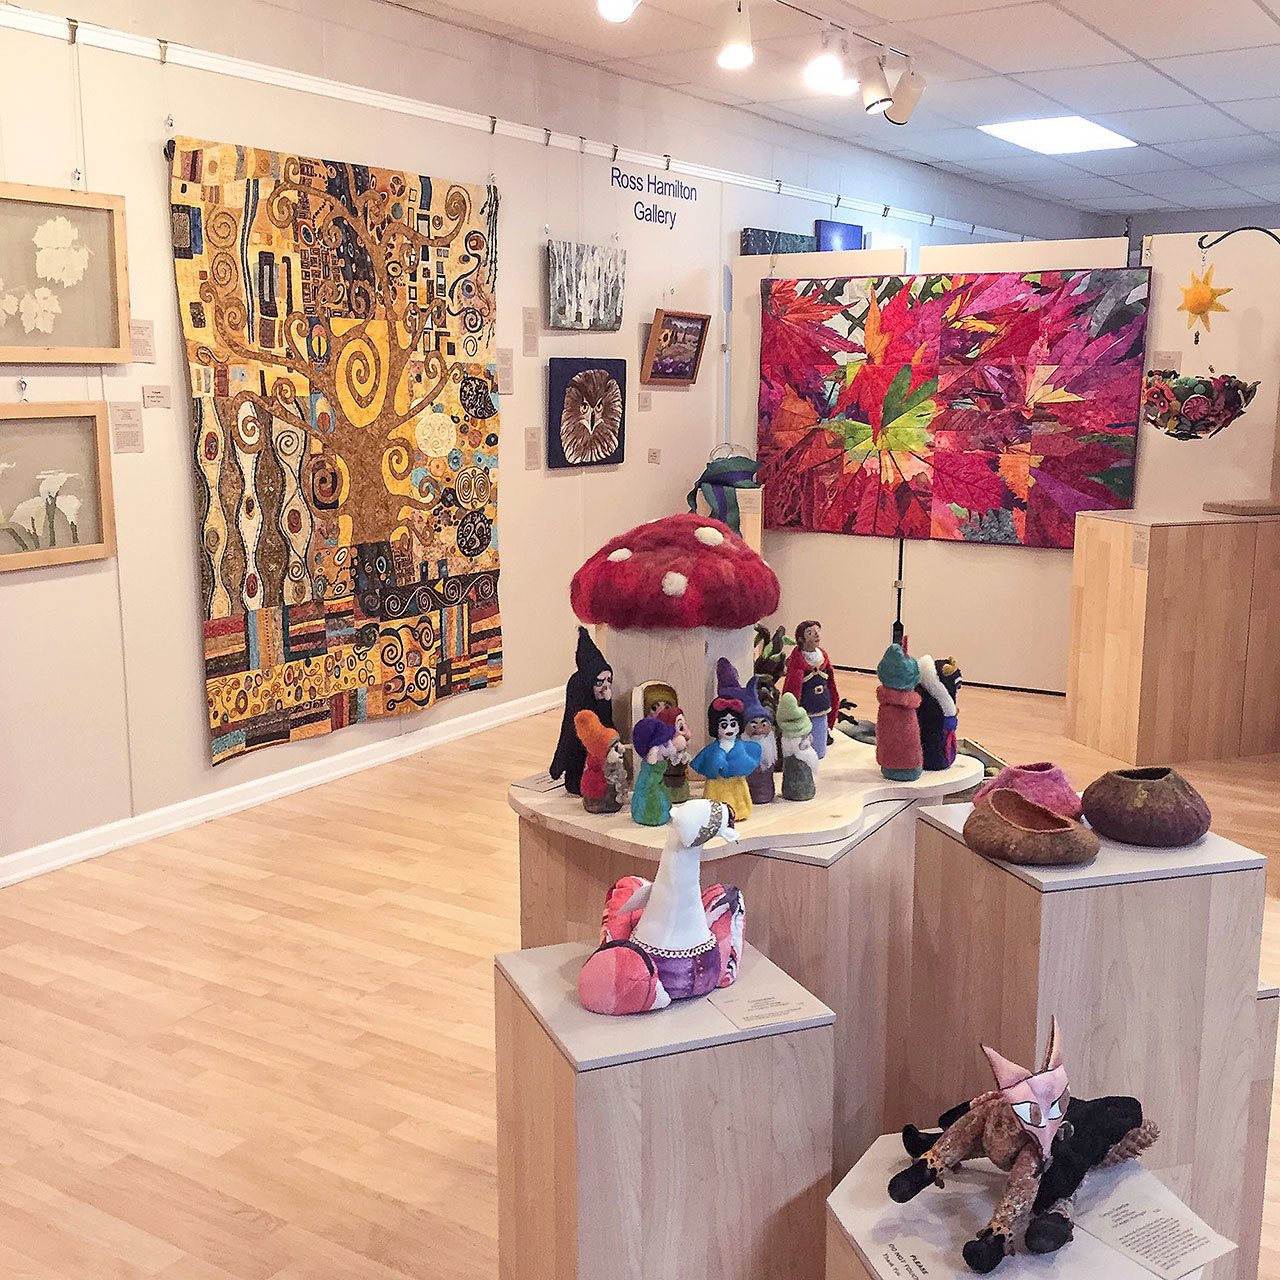 The Museum and Arts Center, 175 W. Cedar St., during Art Walk will offer a glimpse at the North Olympic Fiber Arts Festival’s “Material Measurement – Magnitude, Meaning & Makers” fiber arts juried exhibition. — The Museum and Arts Center.